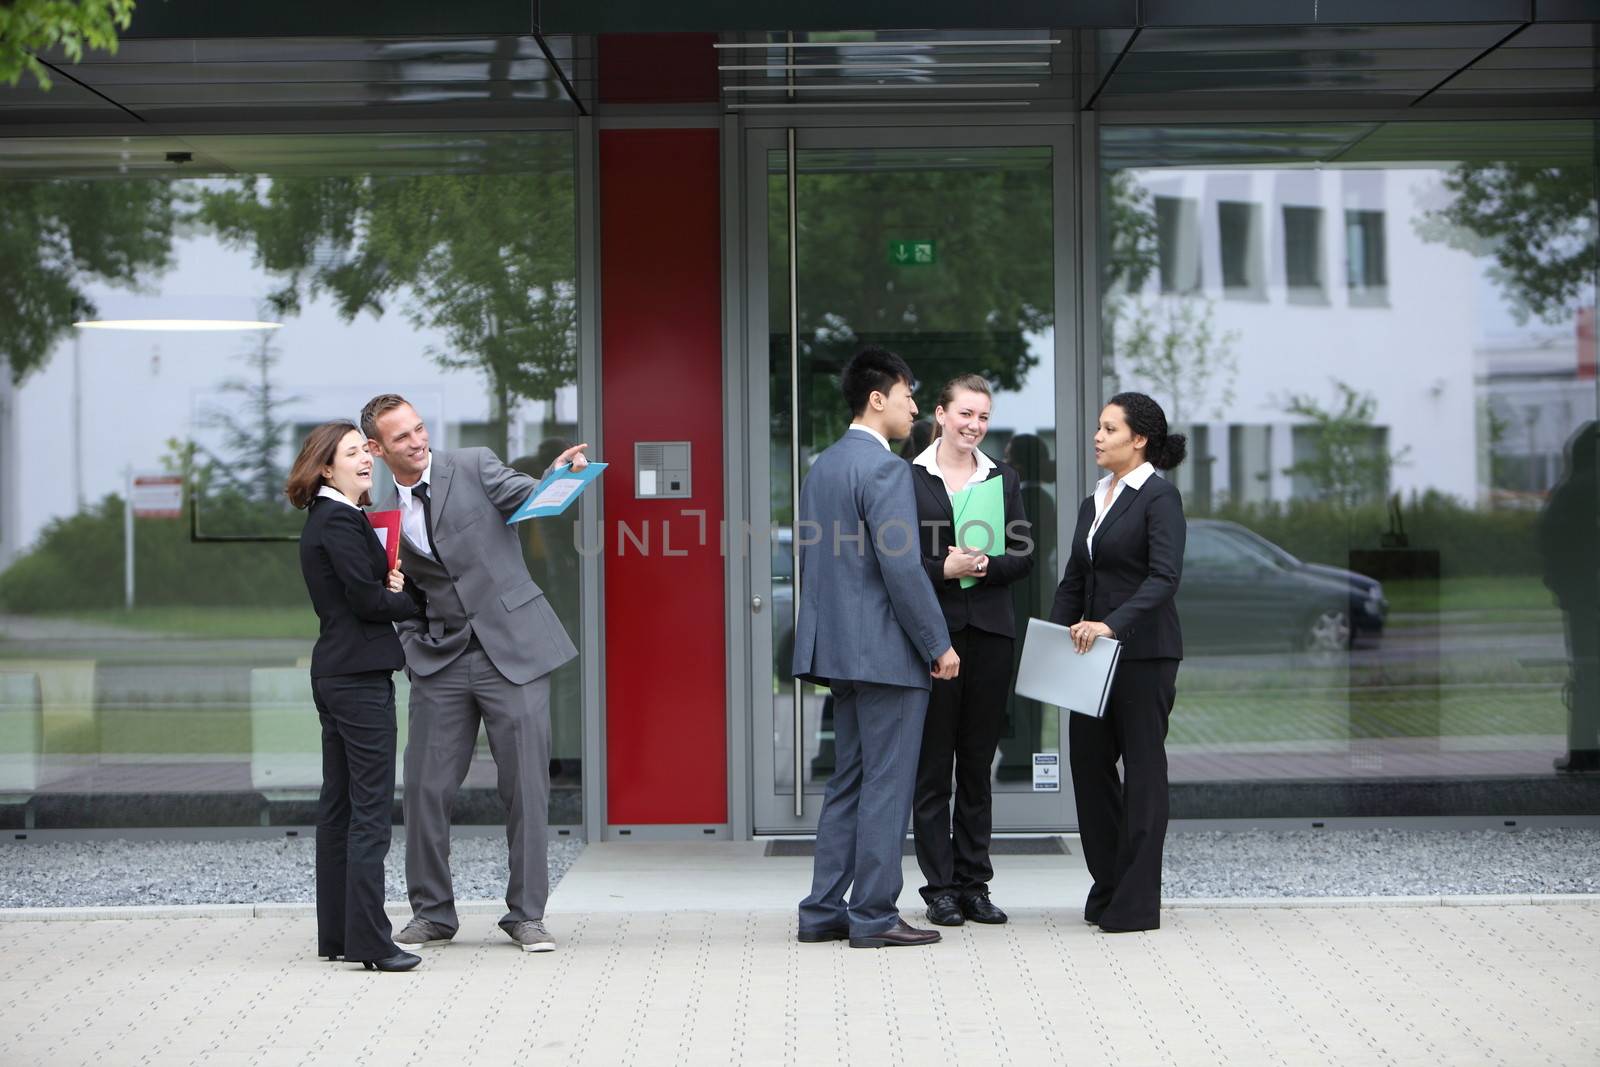 Groups of young diverse businesspeople in suits chatting outdoors in front of the entrance to their office block